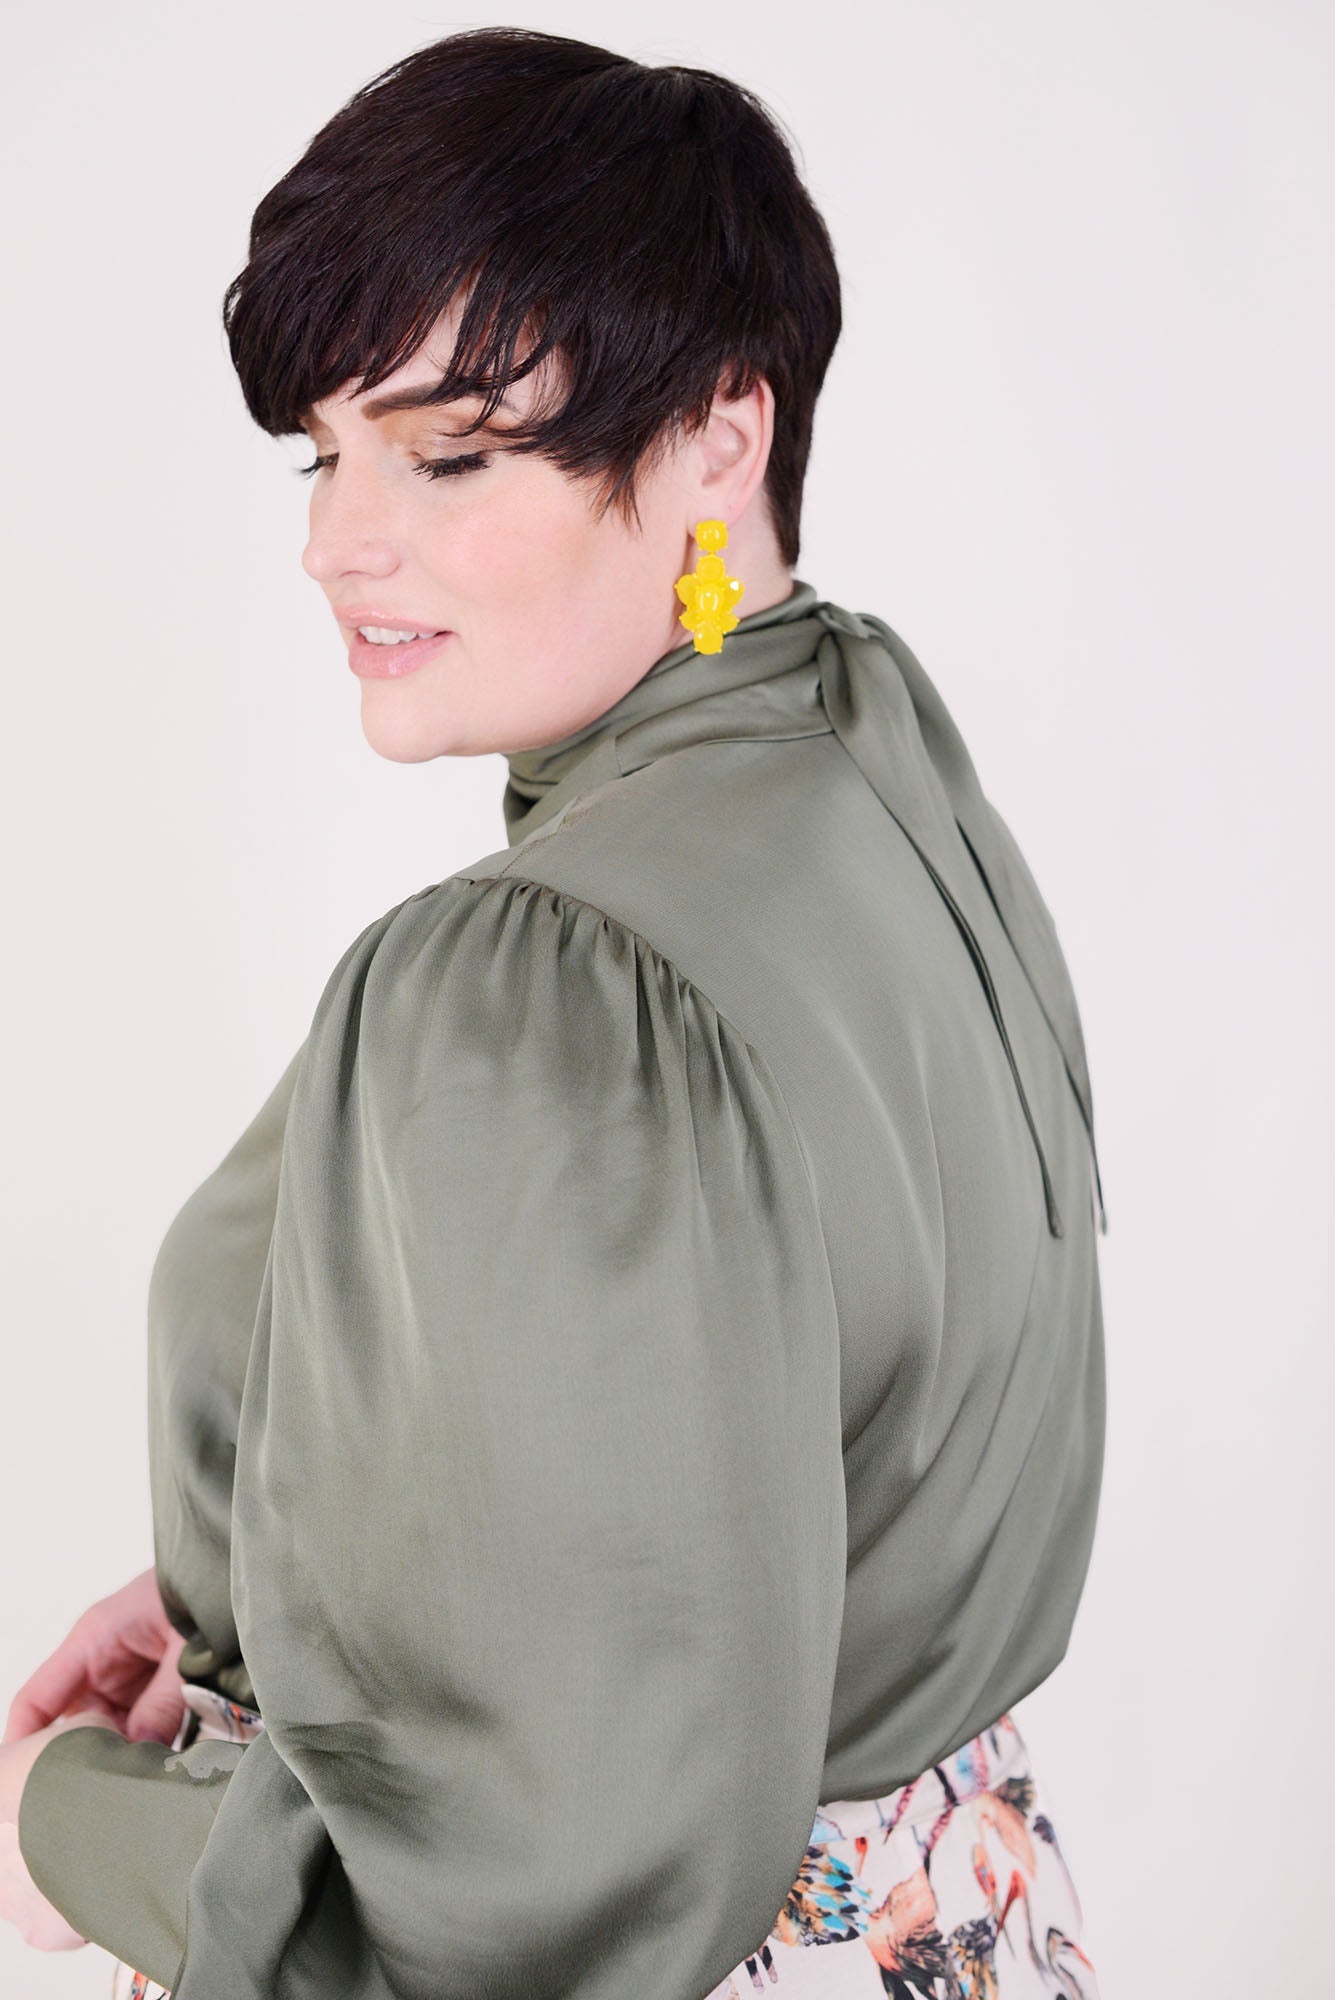 Mayes NYC Mia Scarf Neck Blouse in Solid color Olive worn by model Max